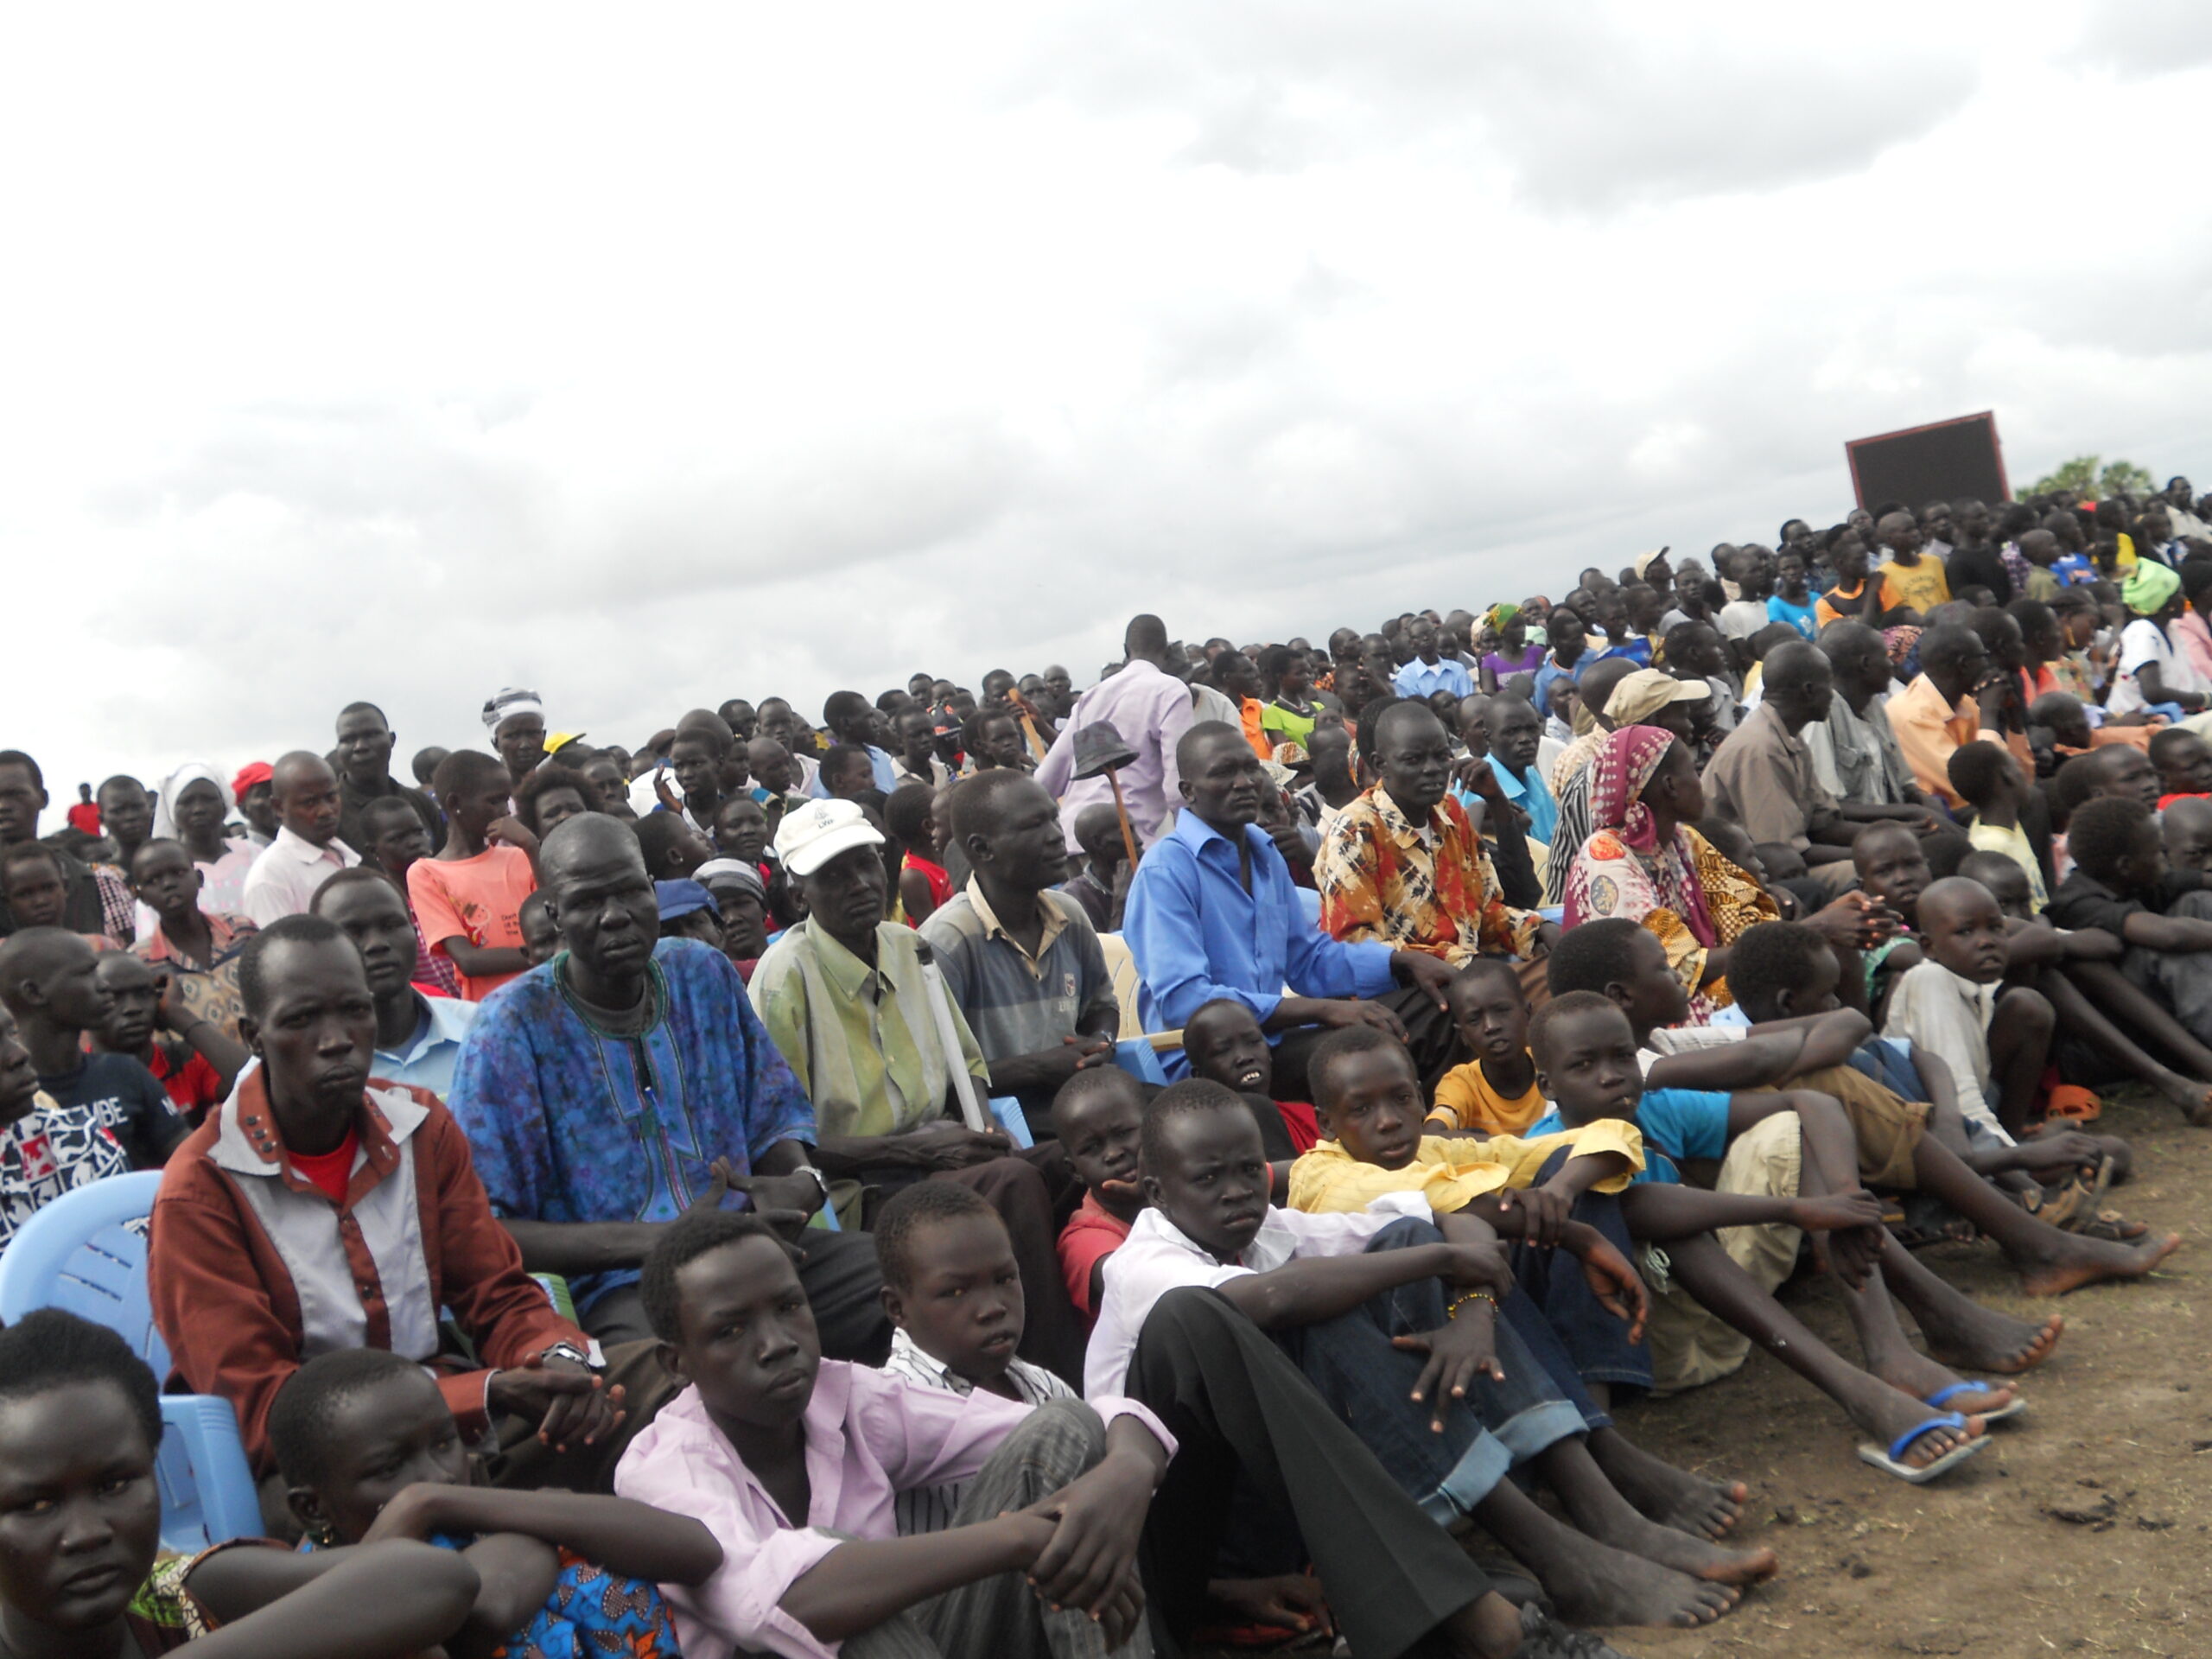 Crowd attending the signing ceremony in Bor May 5, 2012 in Bor (ST)